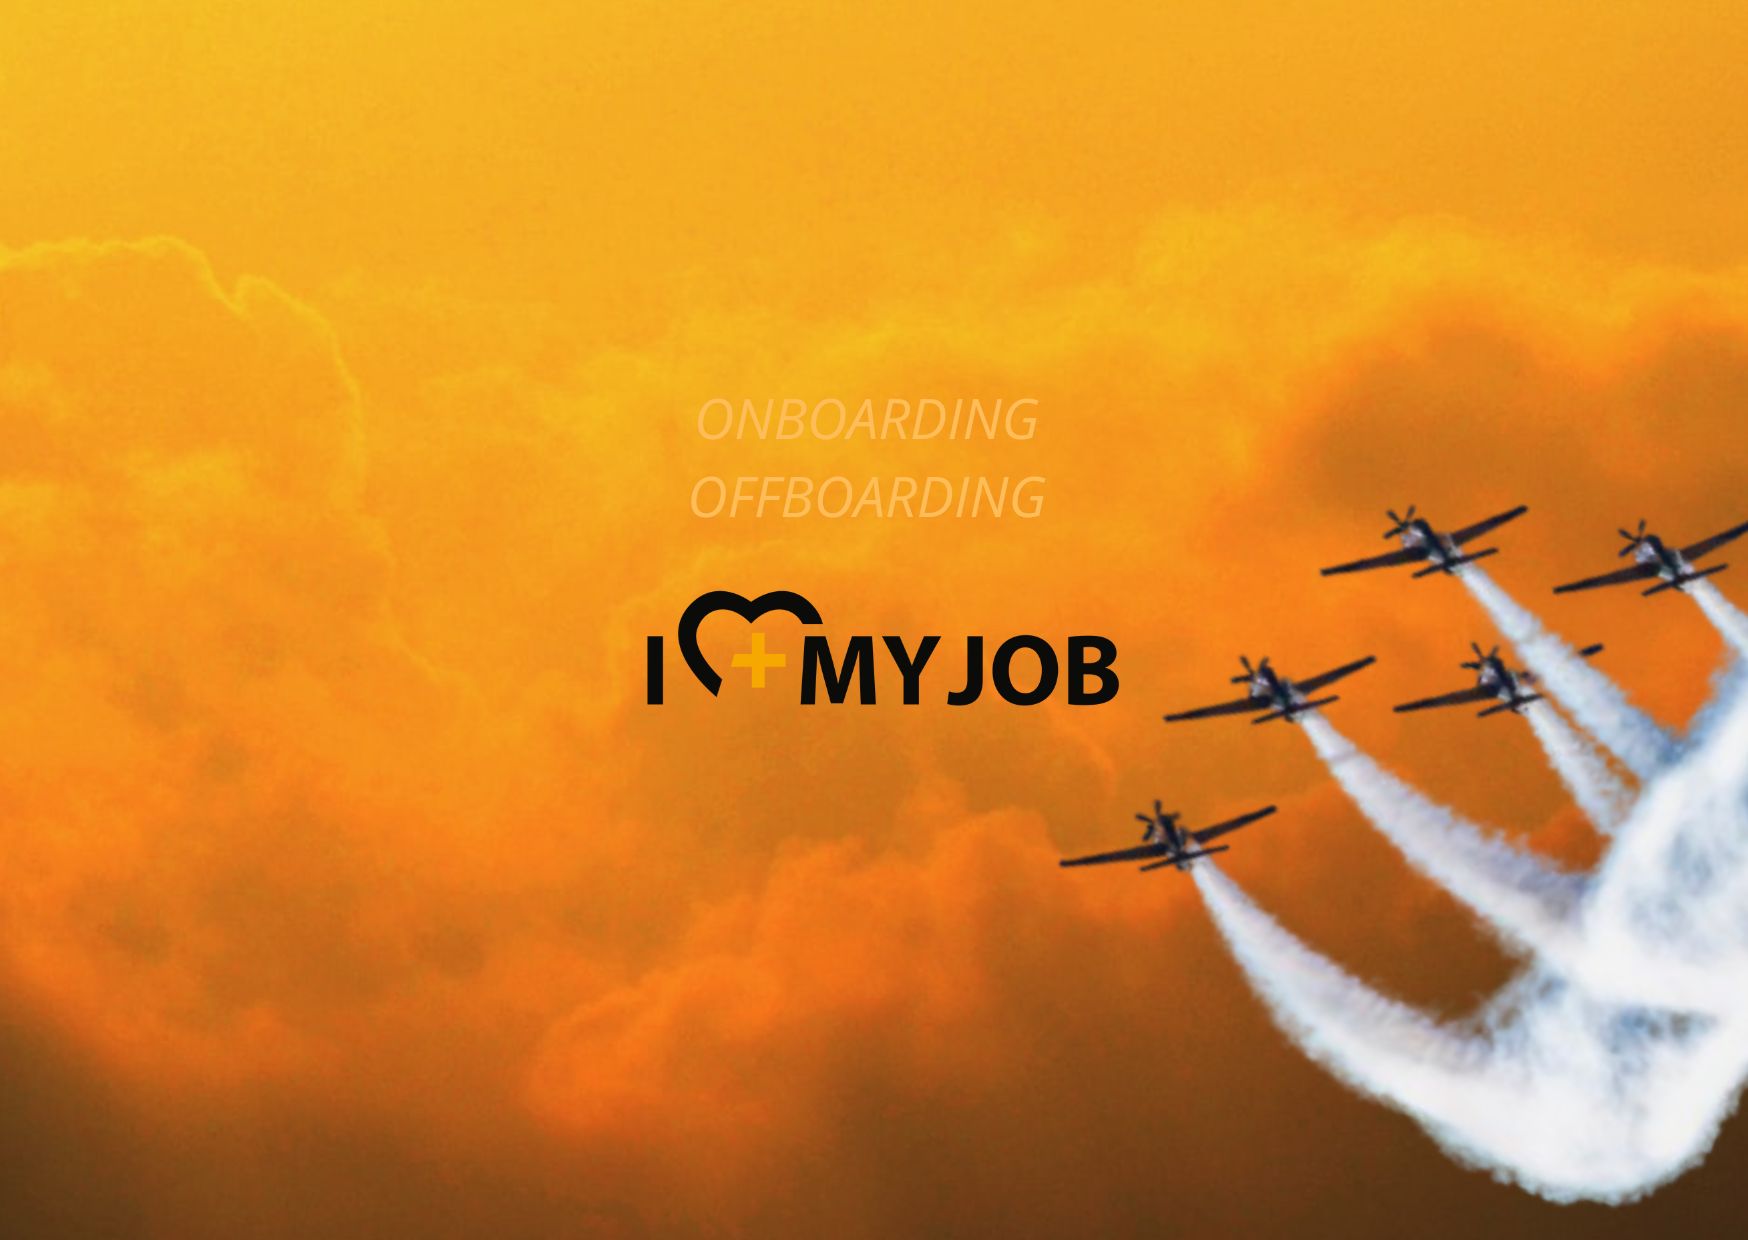 onboarding and offboarding